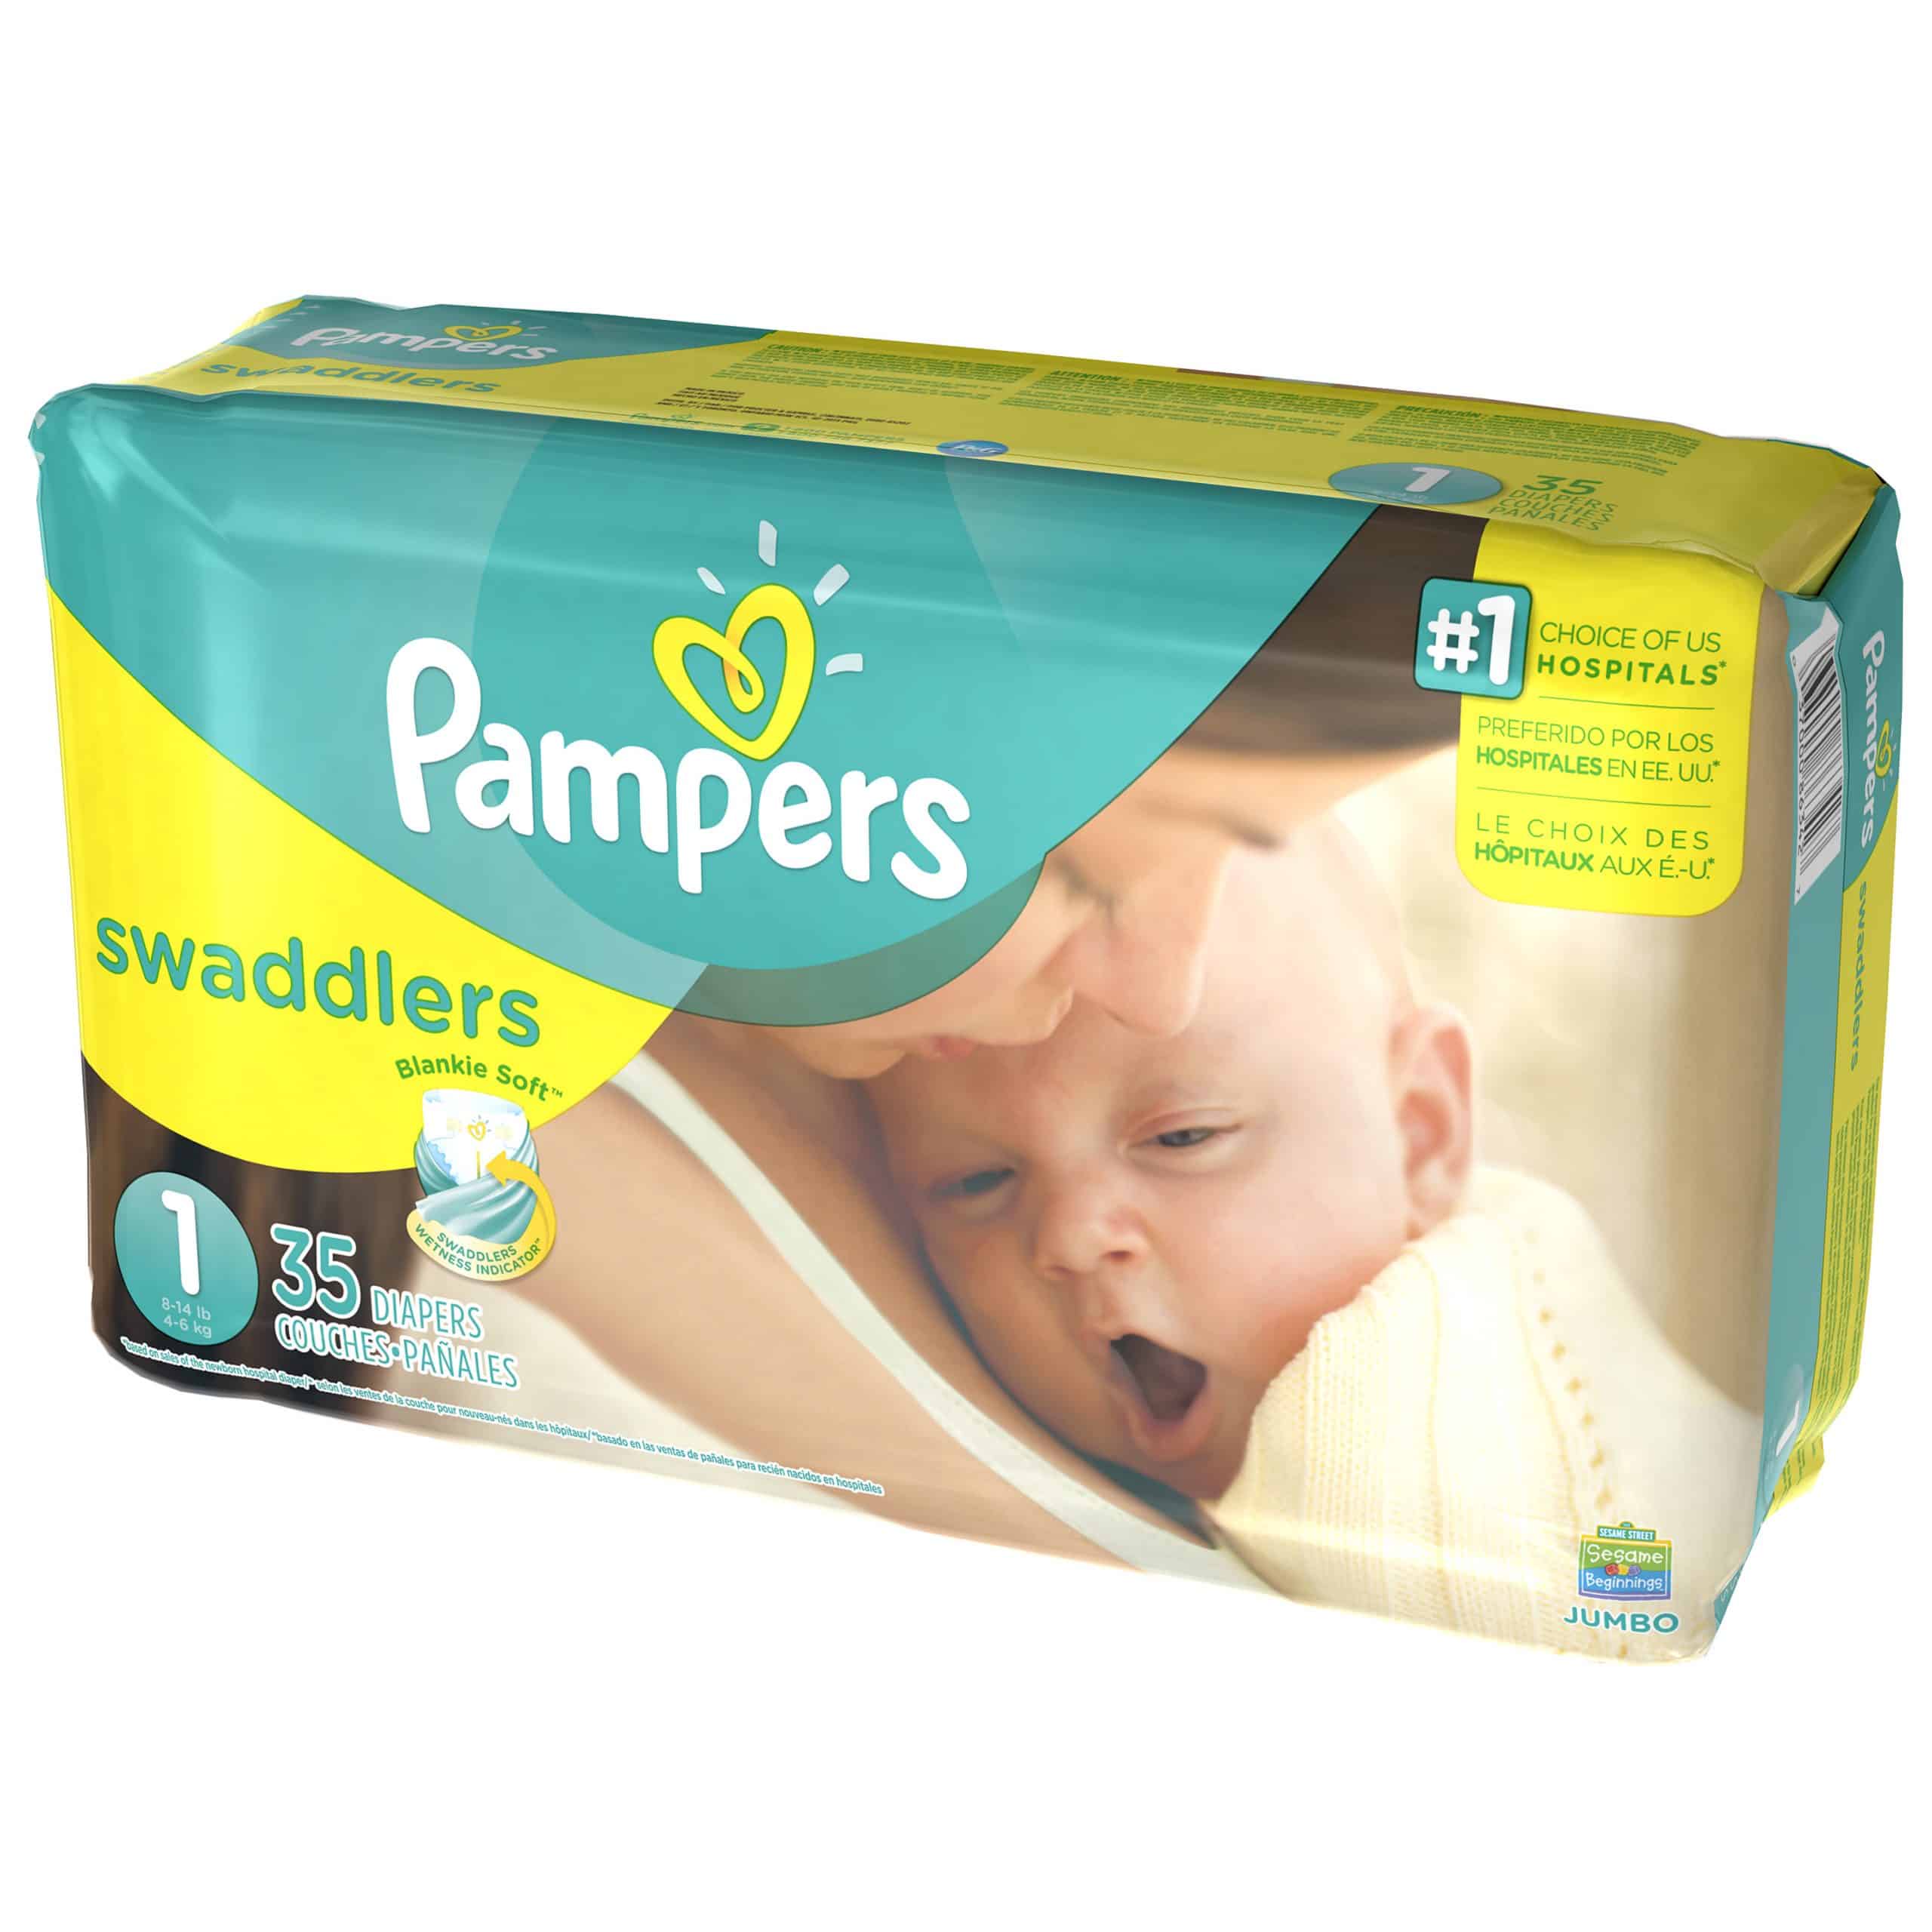 Pampers Swaddlers Newborn Diapers Size 1 35 count